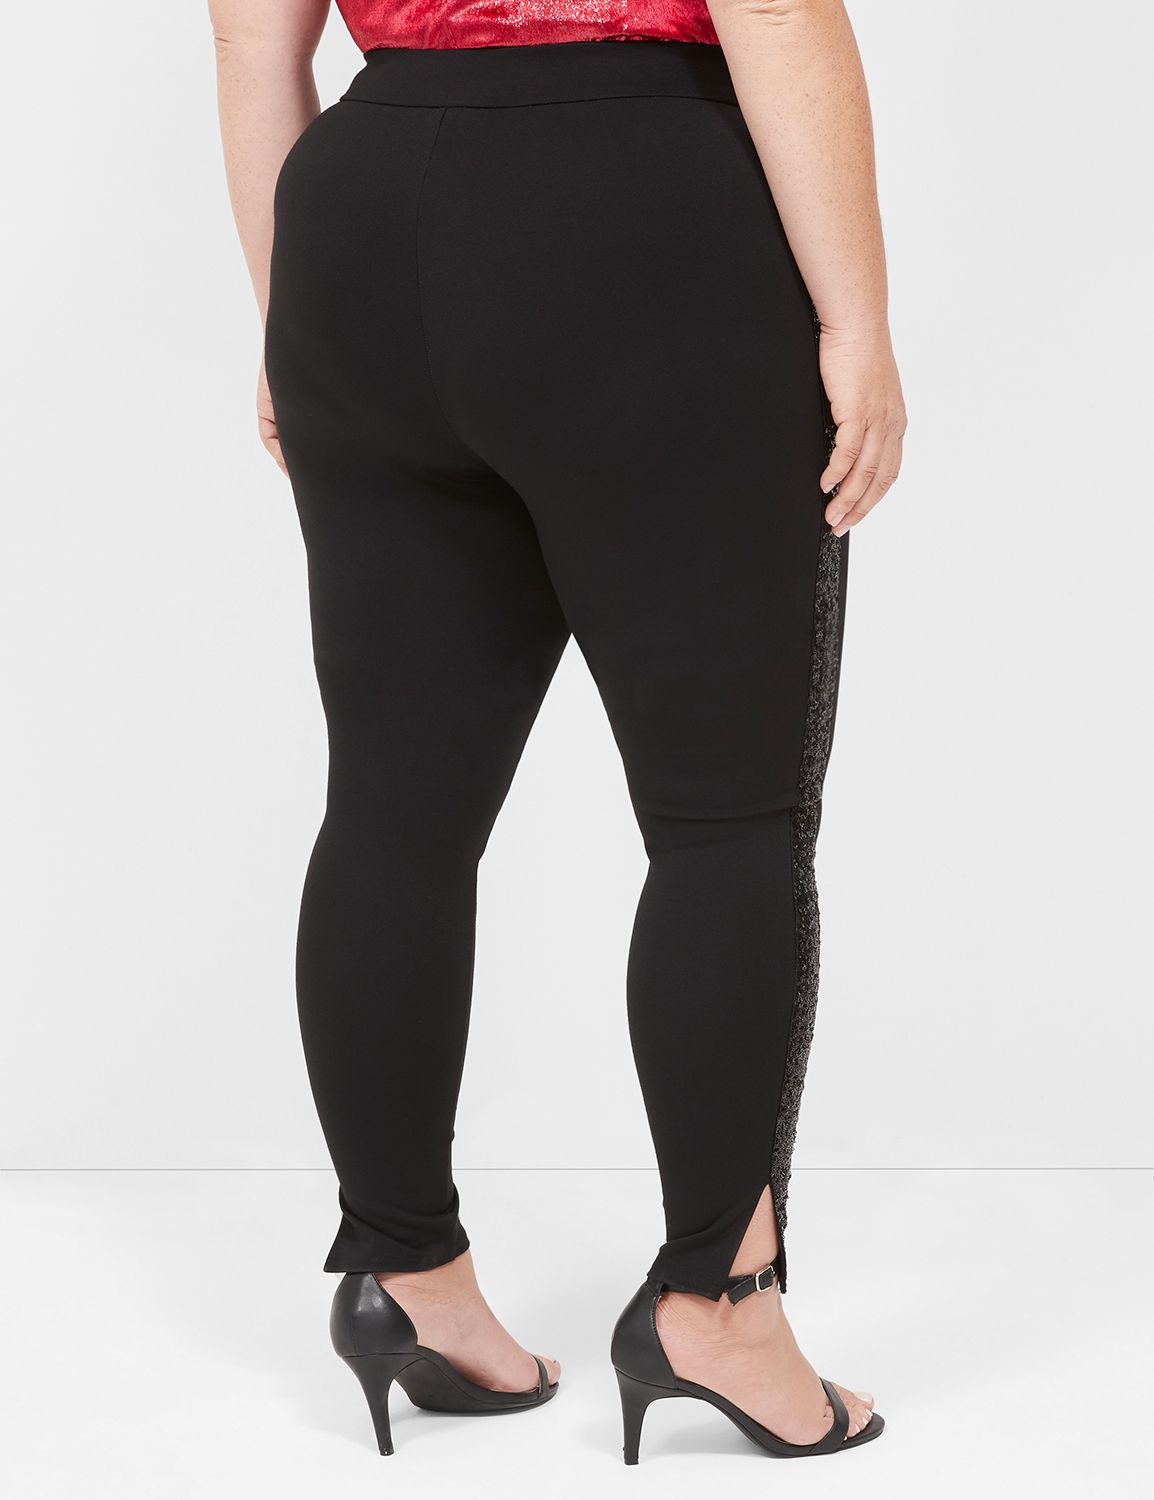 Assets by Spanx Women's Ponte Shaping Leggings - Black, S Size for